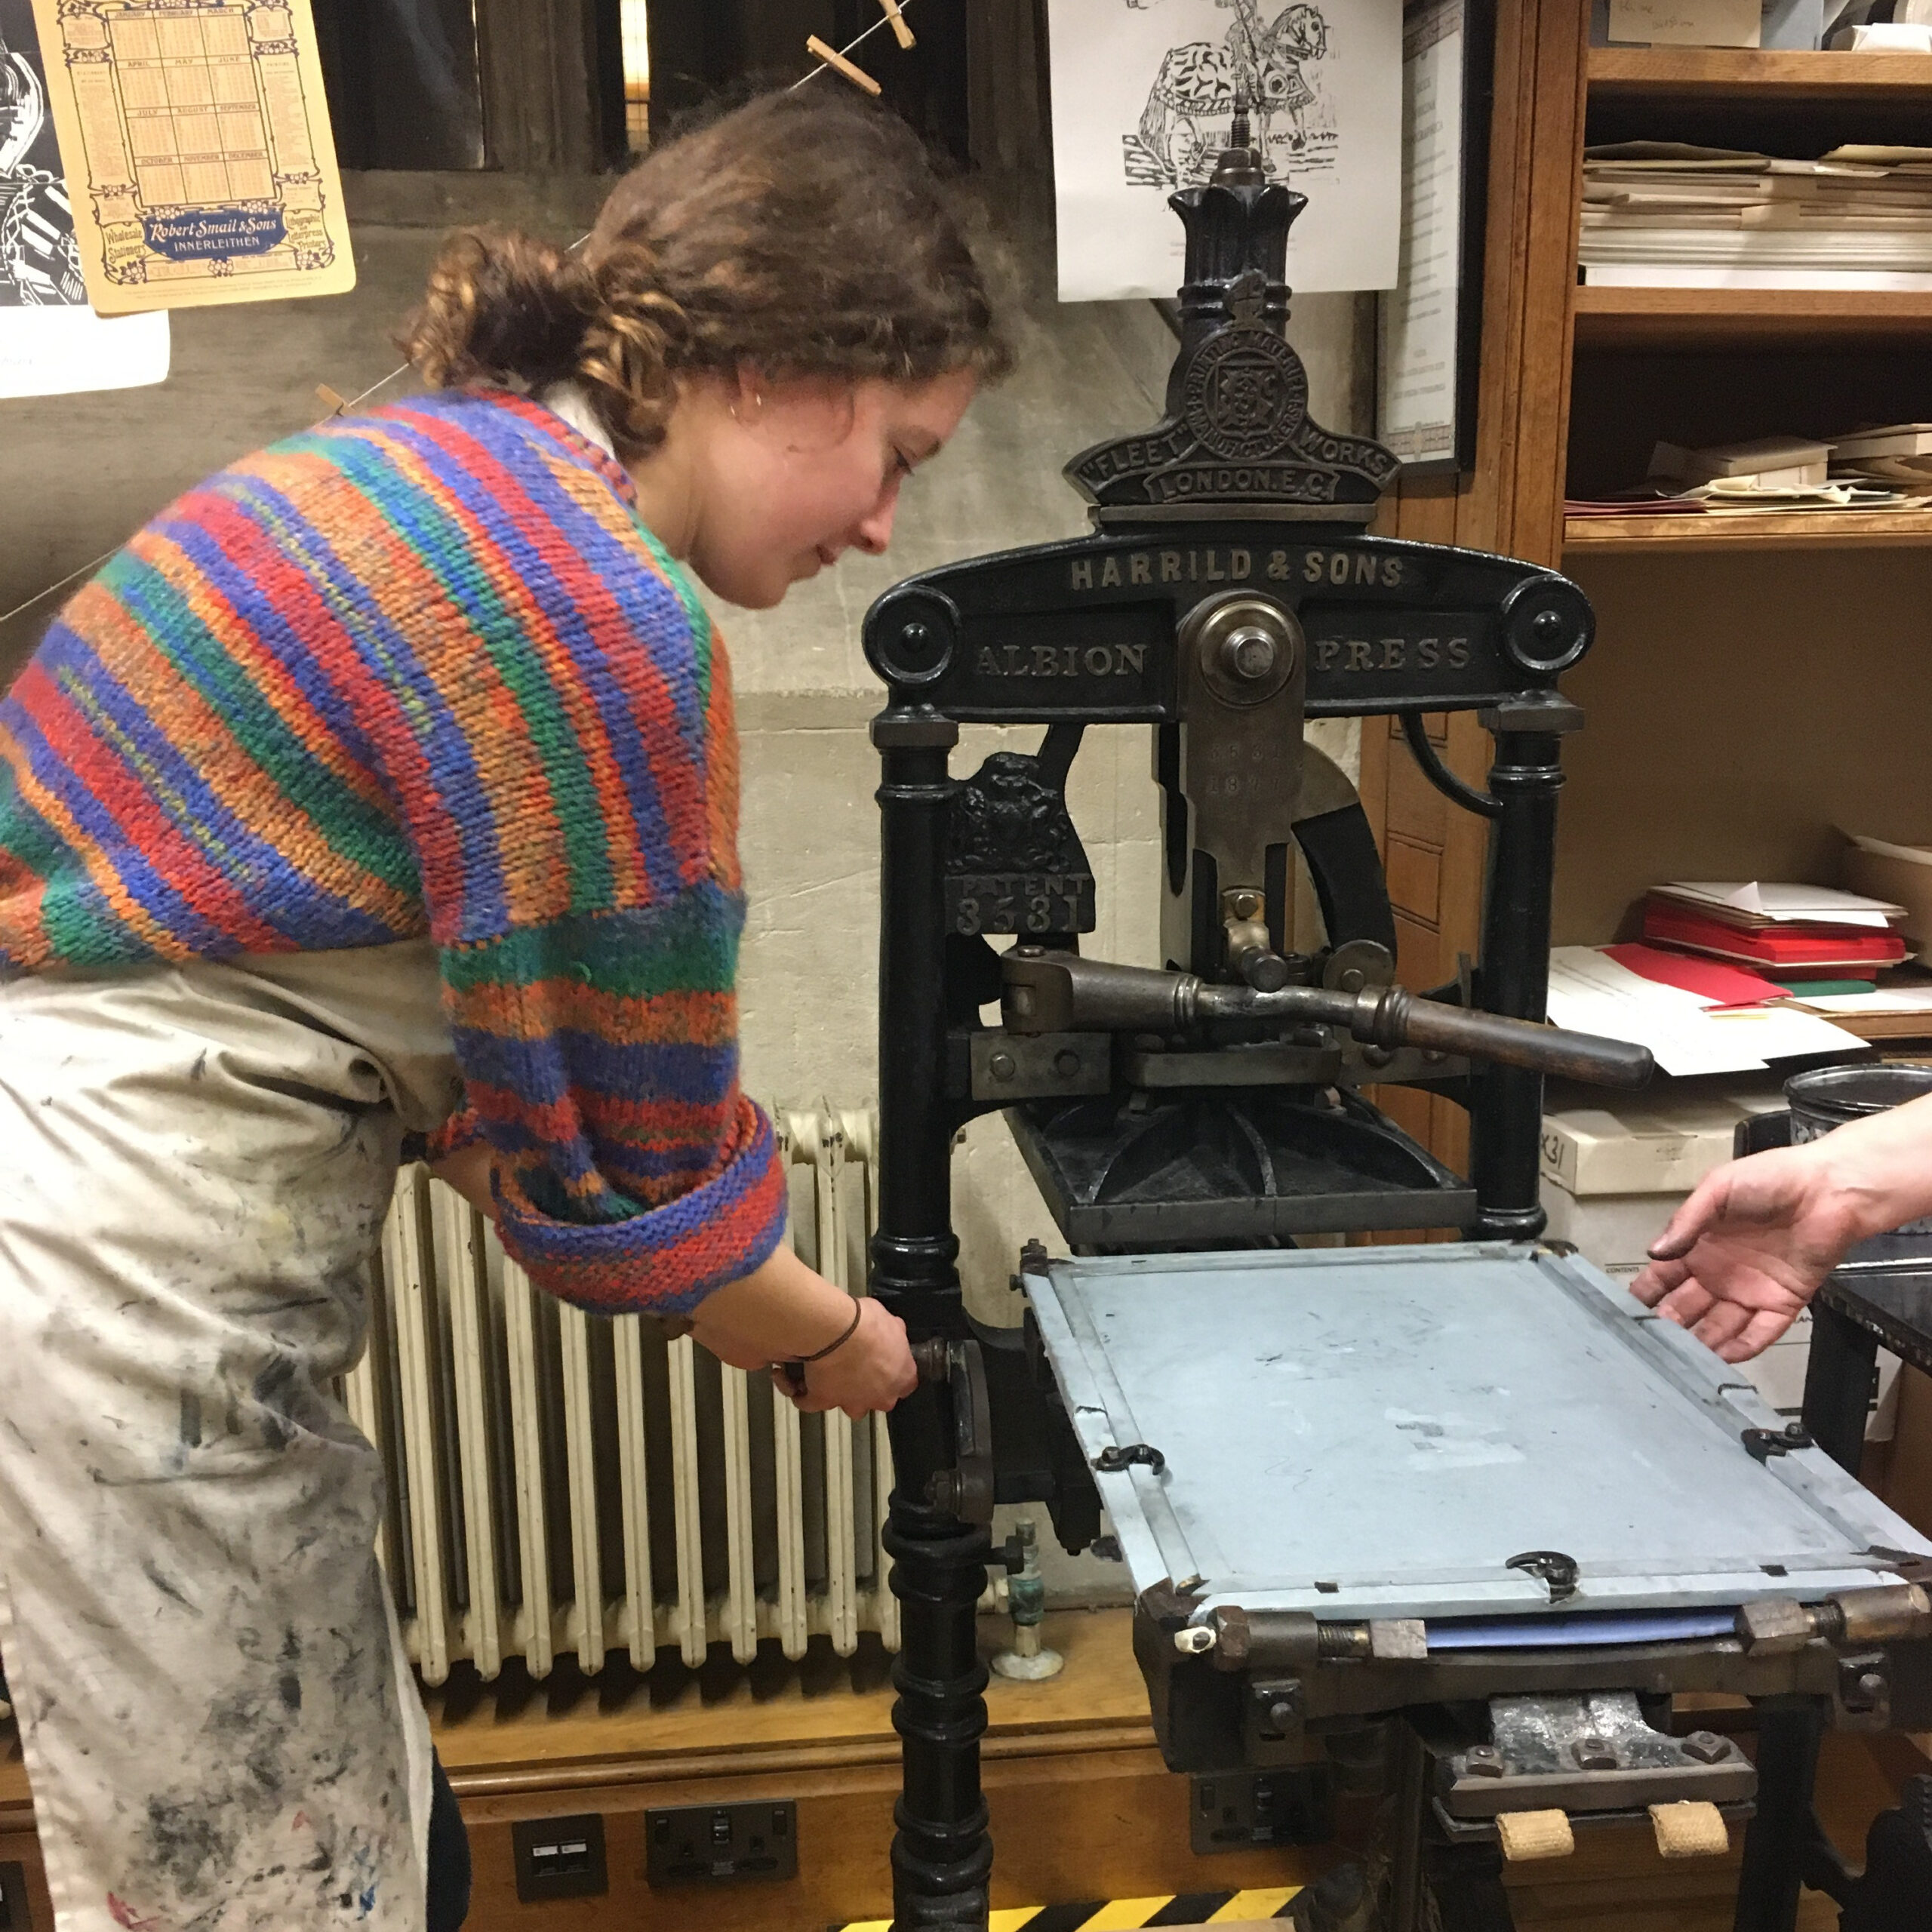 Printing Slogans at the Bodleian’s Press